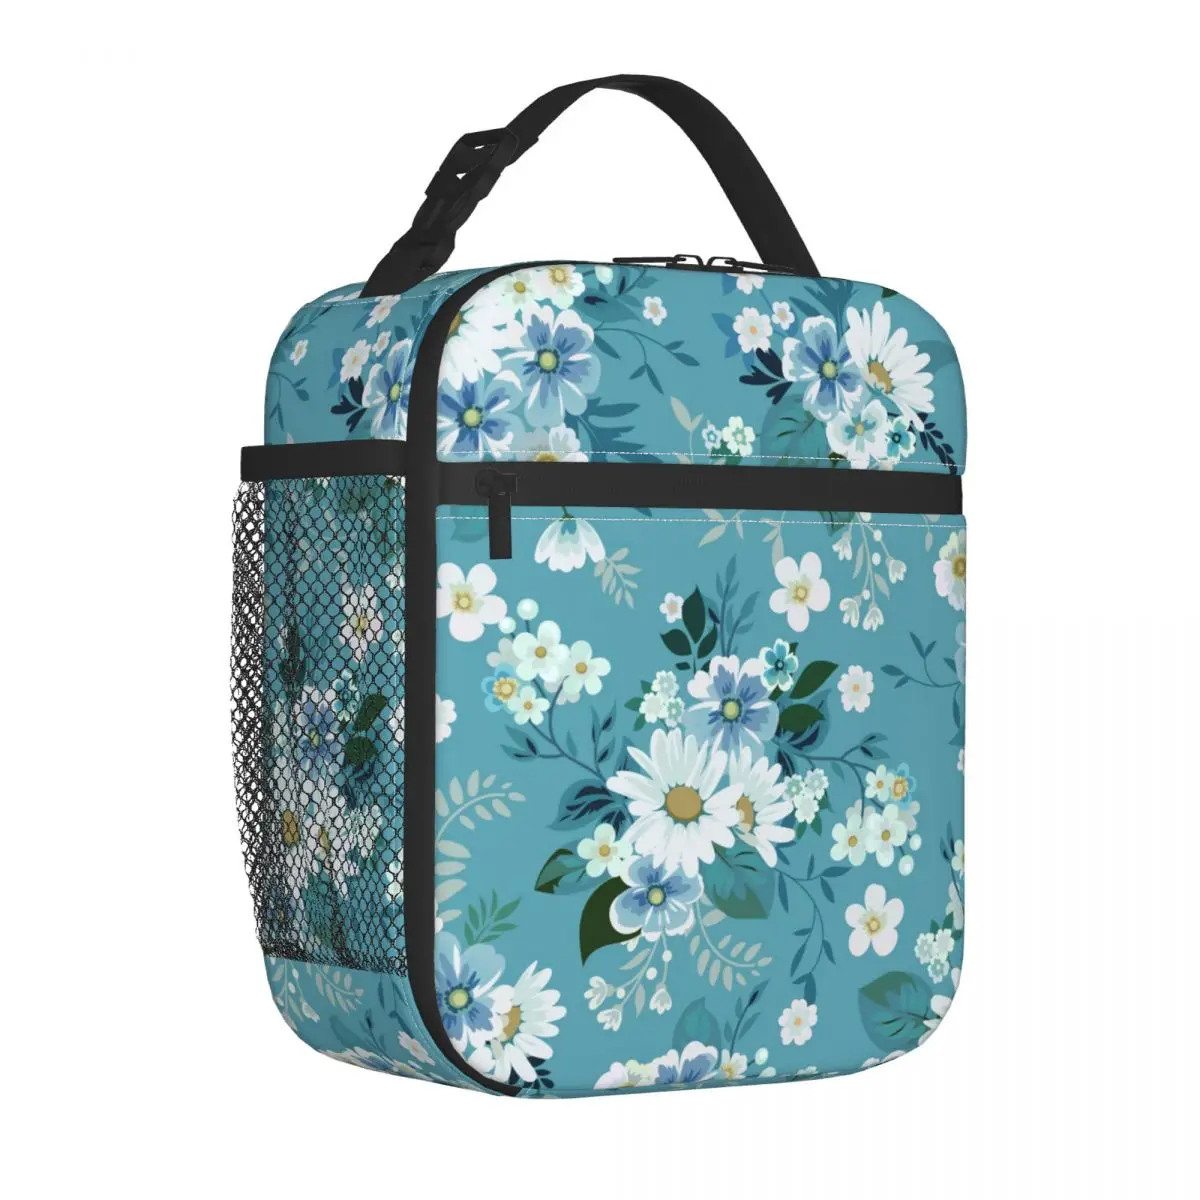 

Fashion Daisies Lunch Bag with Handle Floral Daisy Pirnt Food Mesh Pocket Cooler Bag Hot Cool Cooling Car Thermal Bag